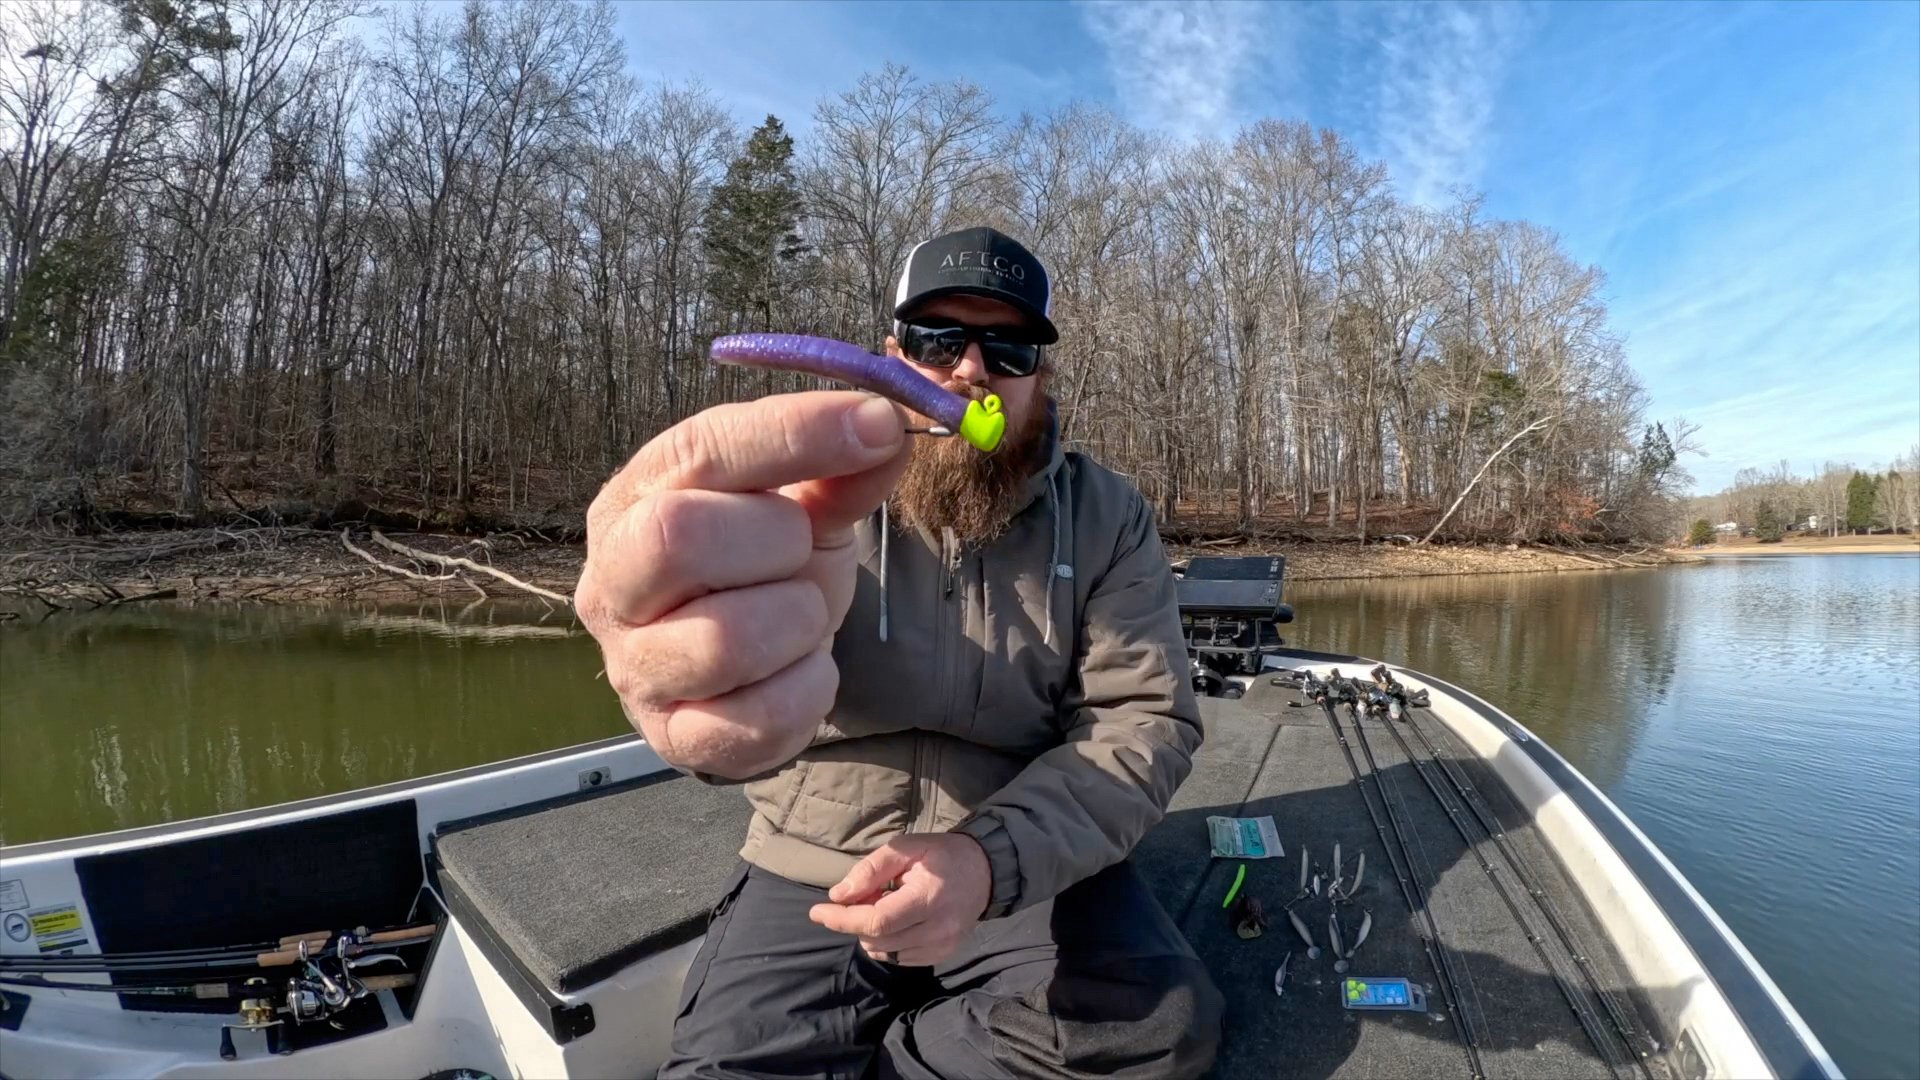 5 Winter Bait Tricks You've Got To Try! ( The Baits We Really Use